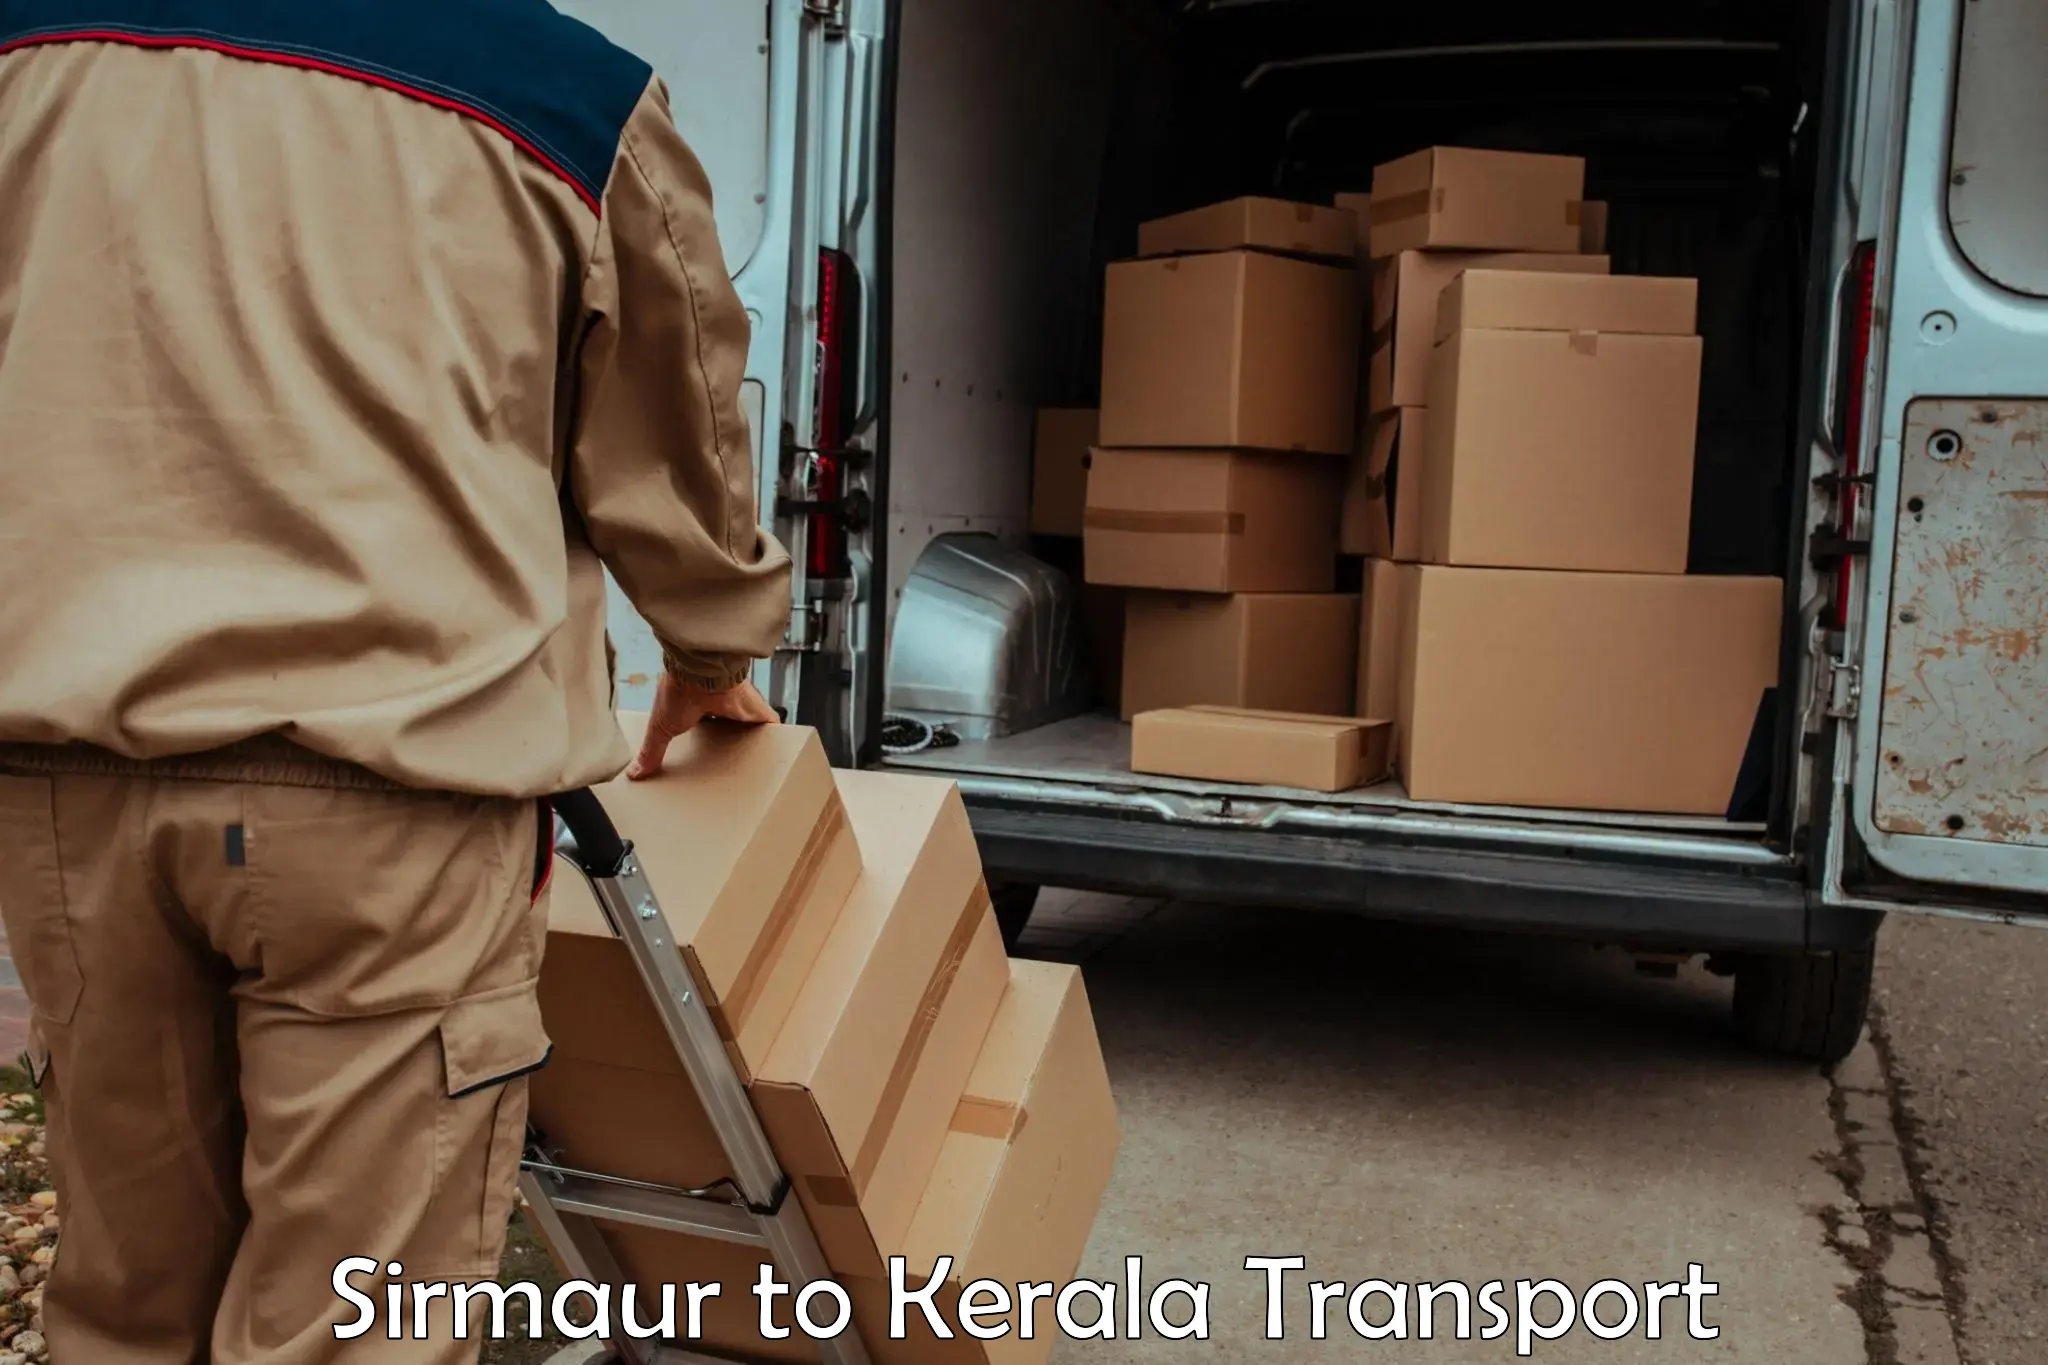 Goods delivery service Sirmaur to Anjumoorthy